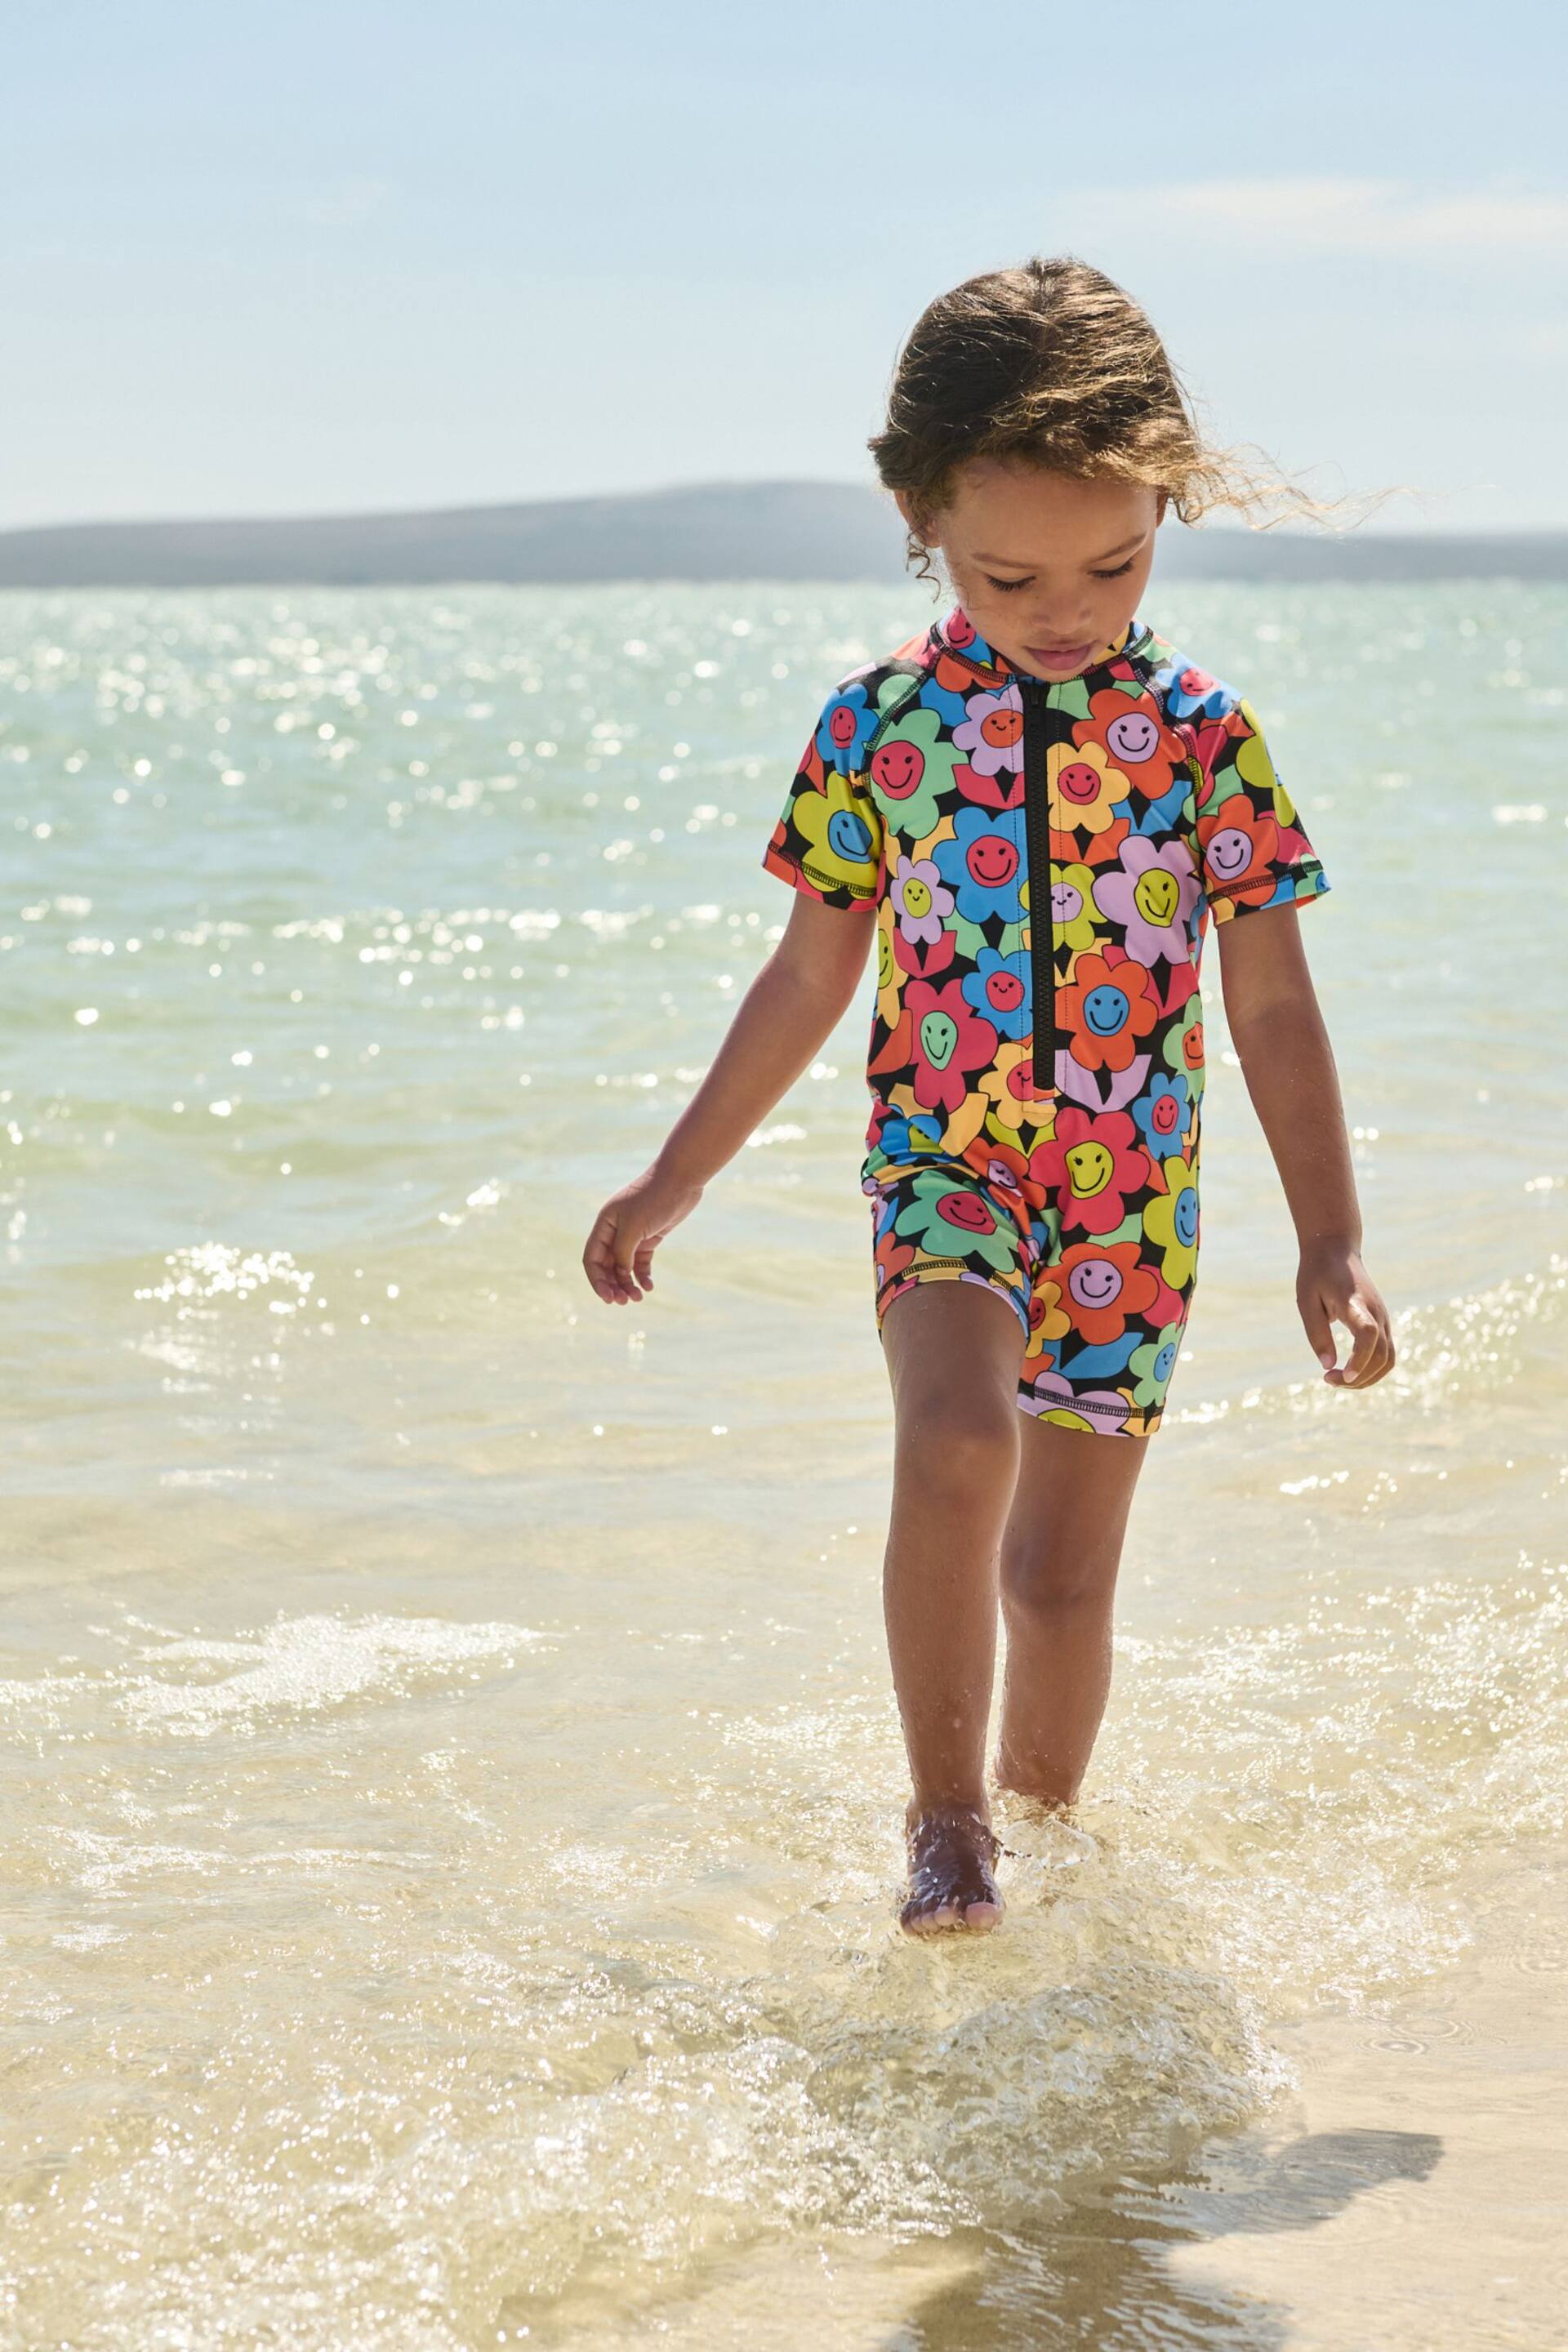 Multi Bright Floral Sunsafe Swimsuit (3mths-7yrs) - Image 1 of 7